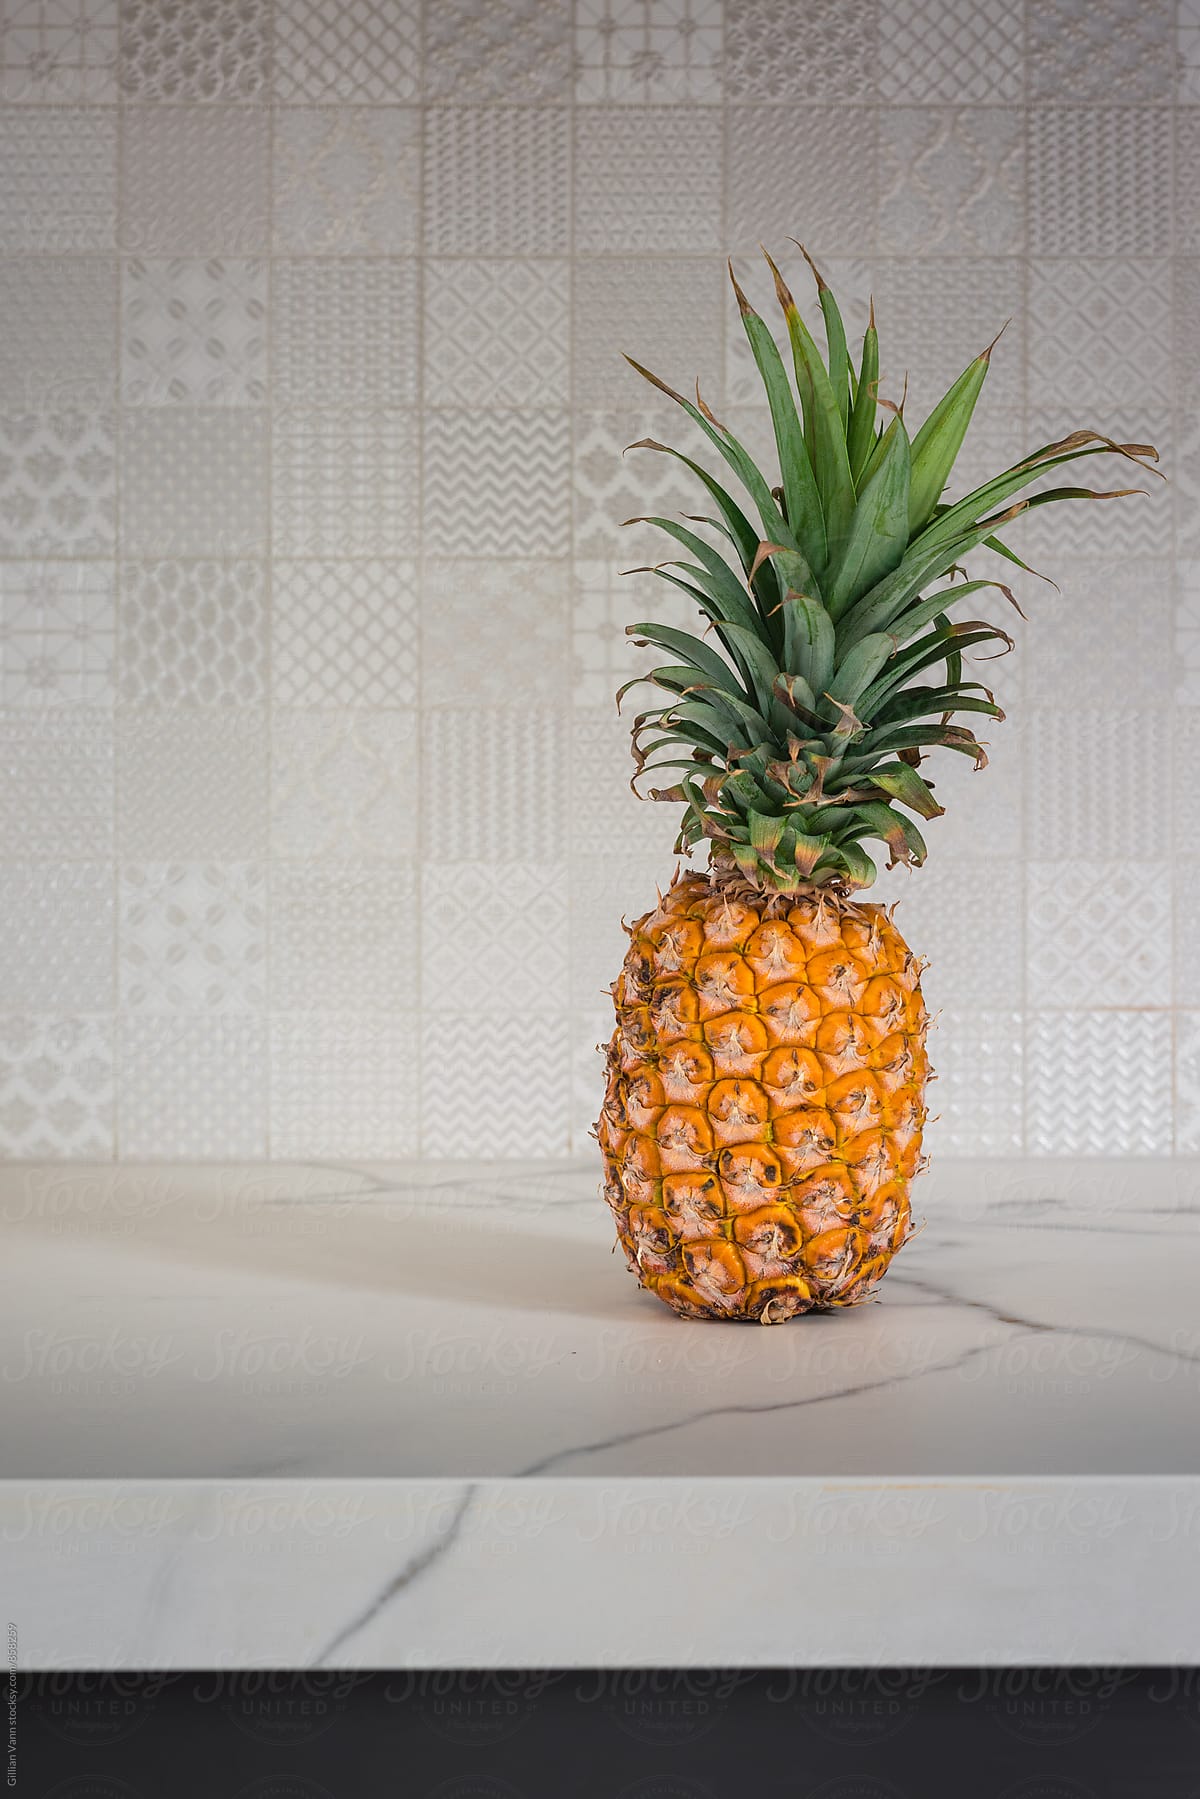 pineapple on a white countertop, with patterned tile background